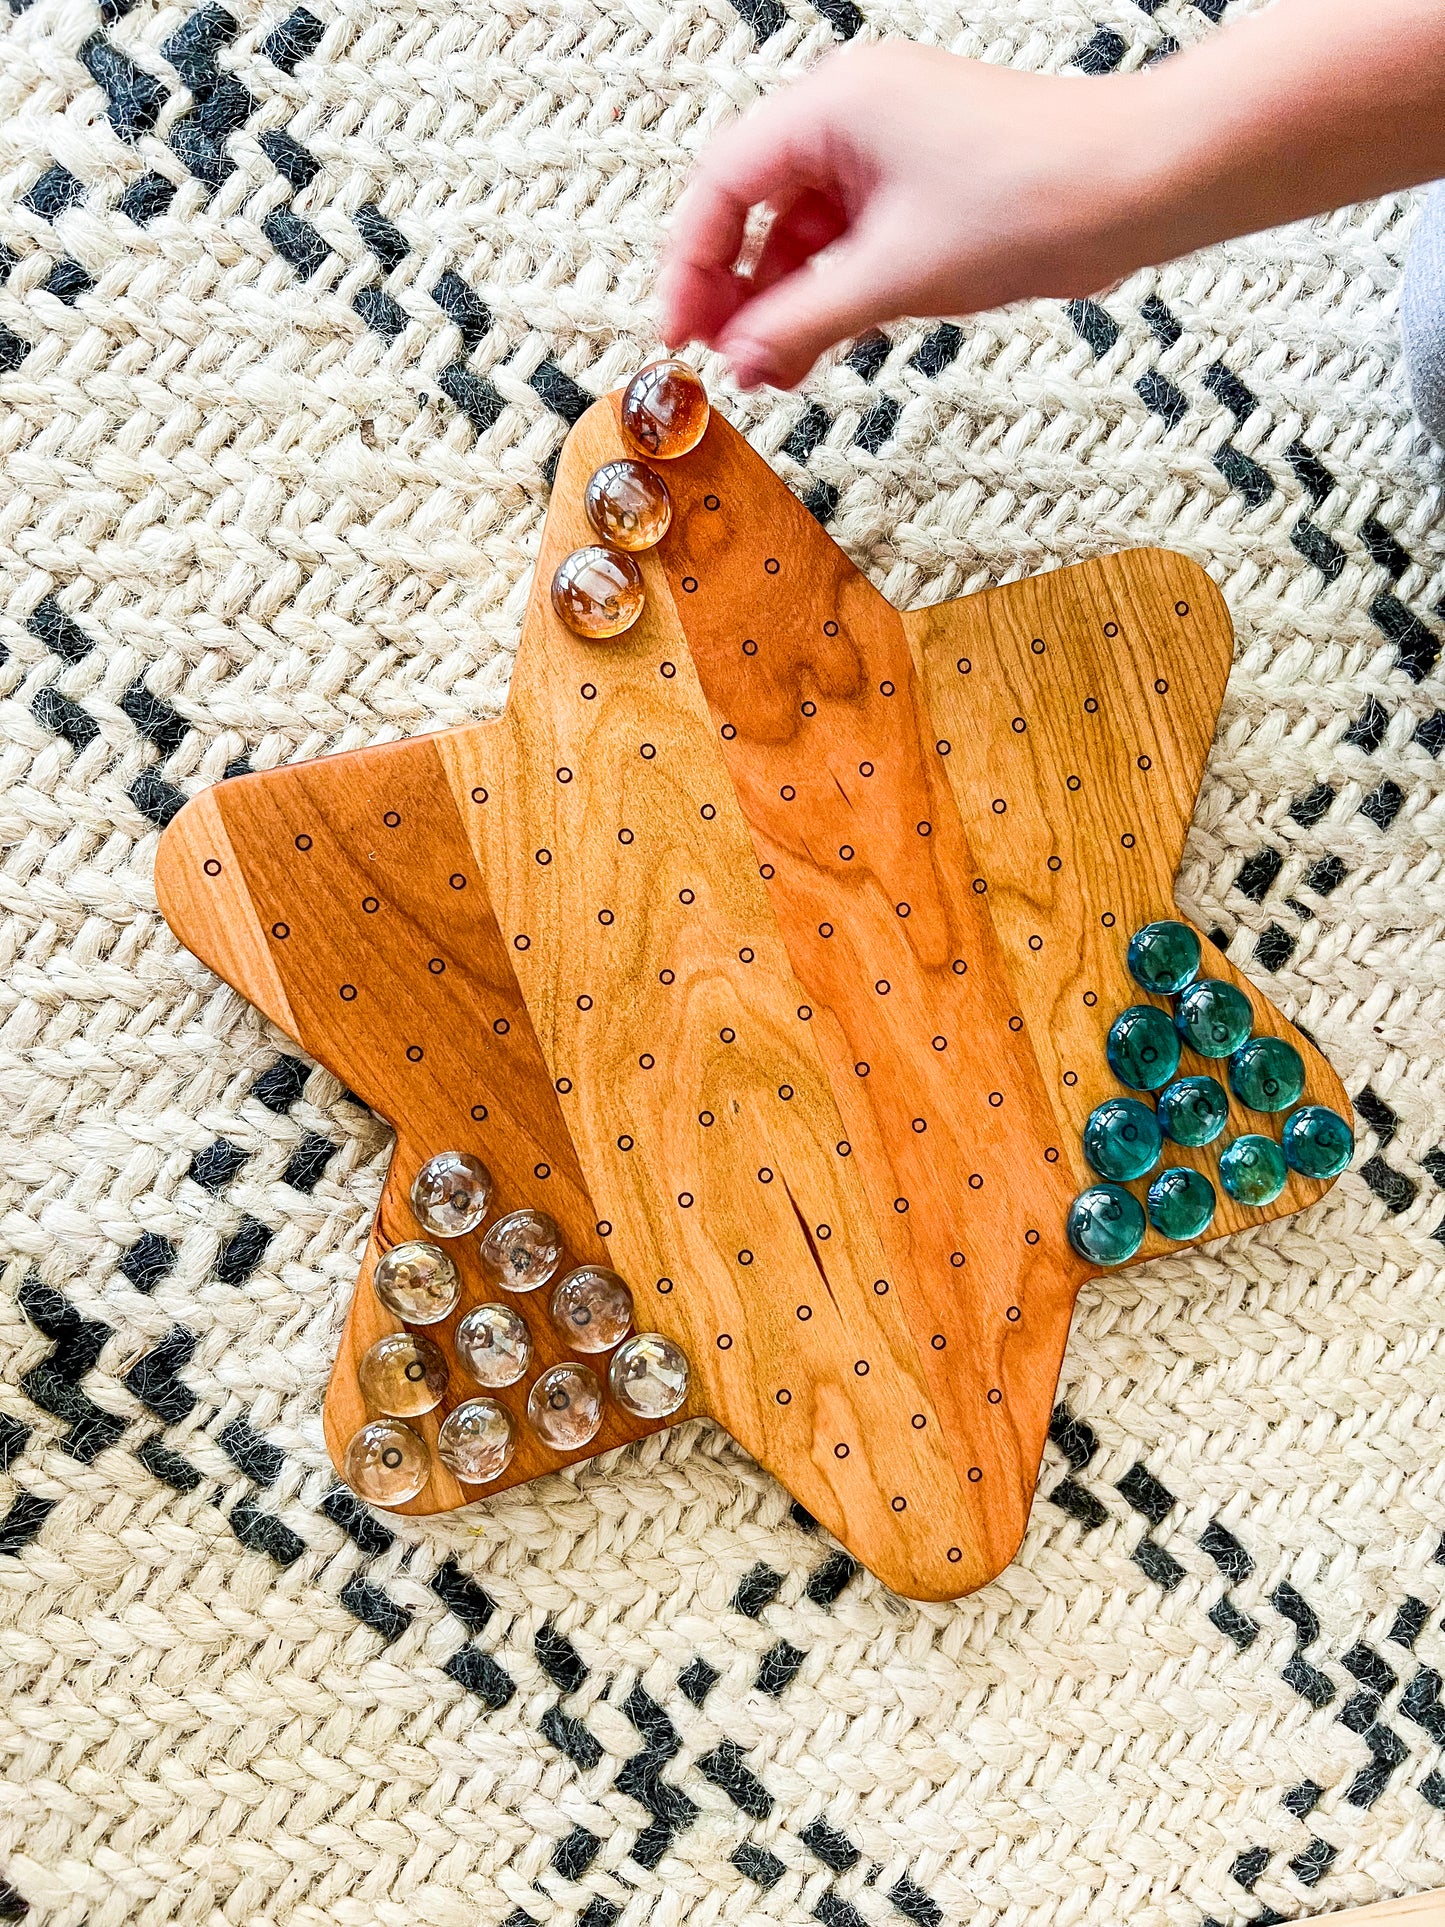 Star shaped marble run and dotted geoboard